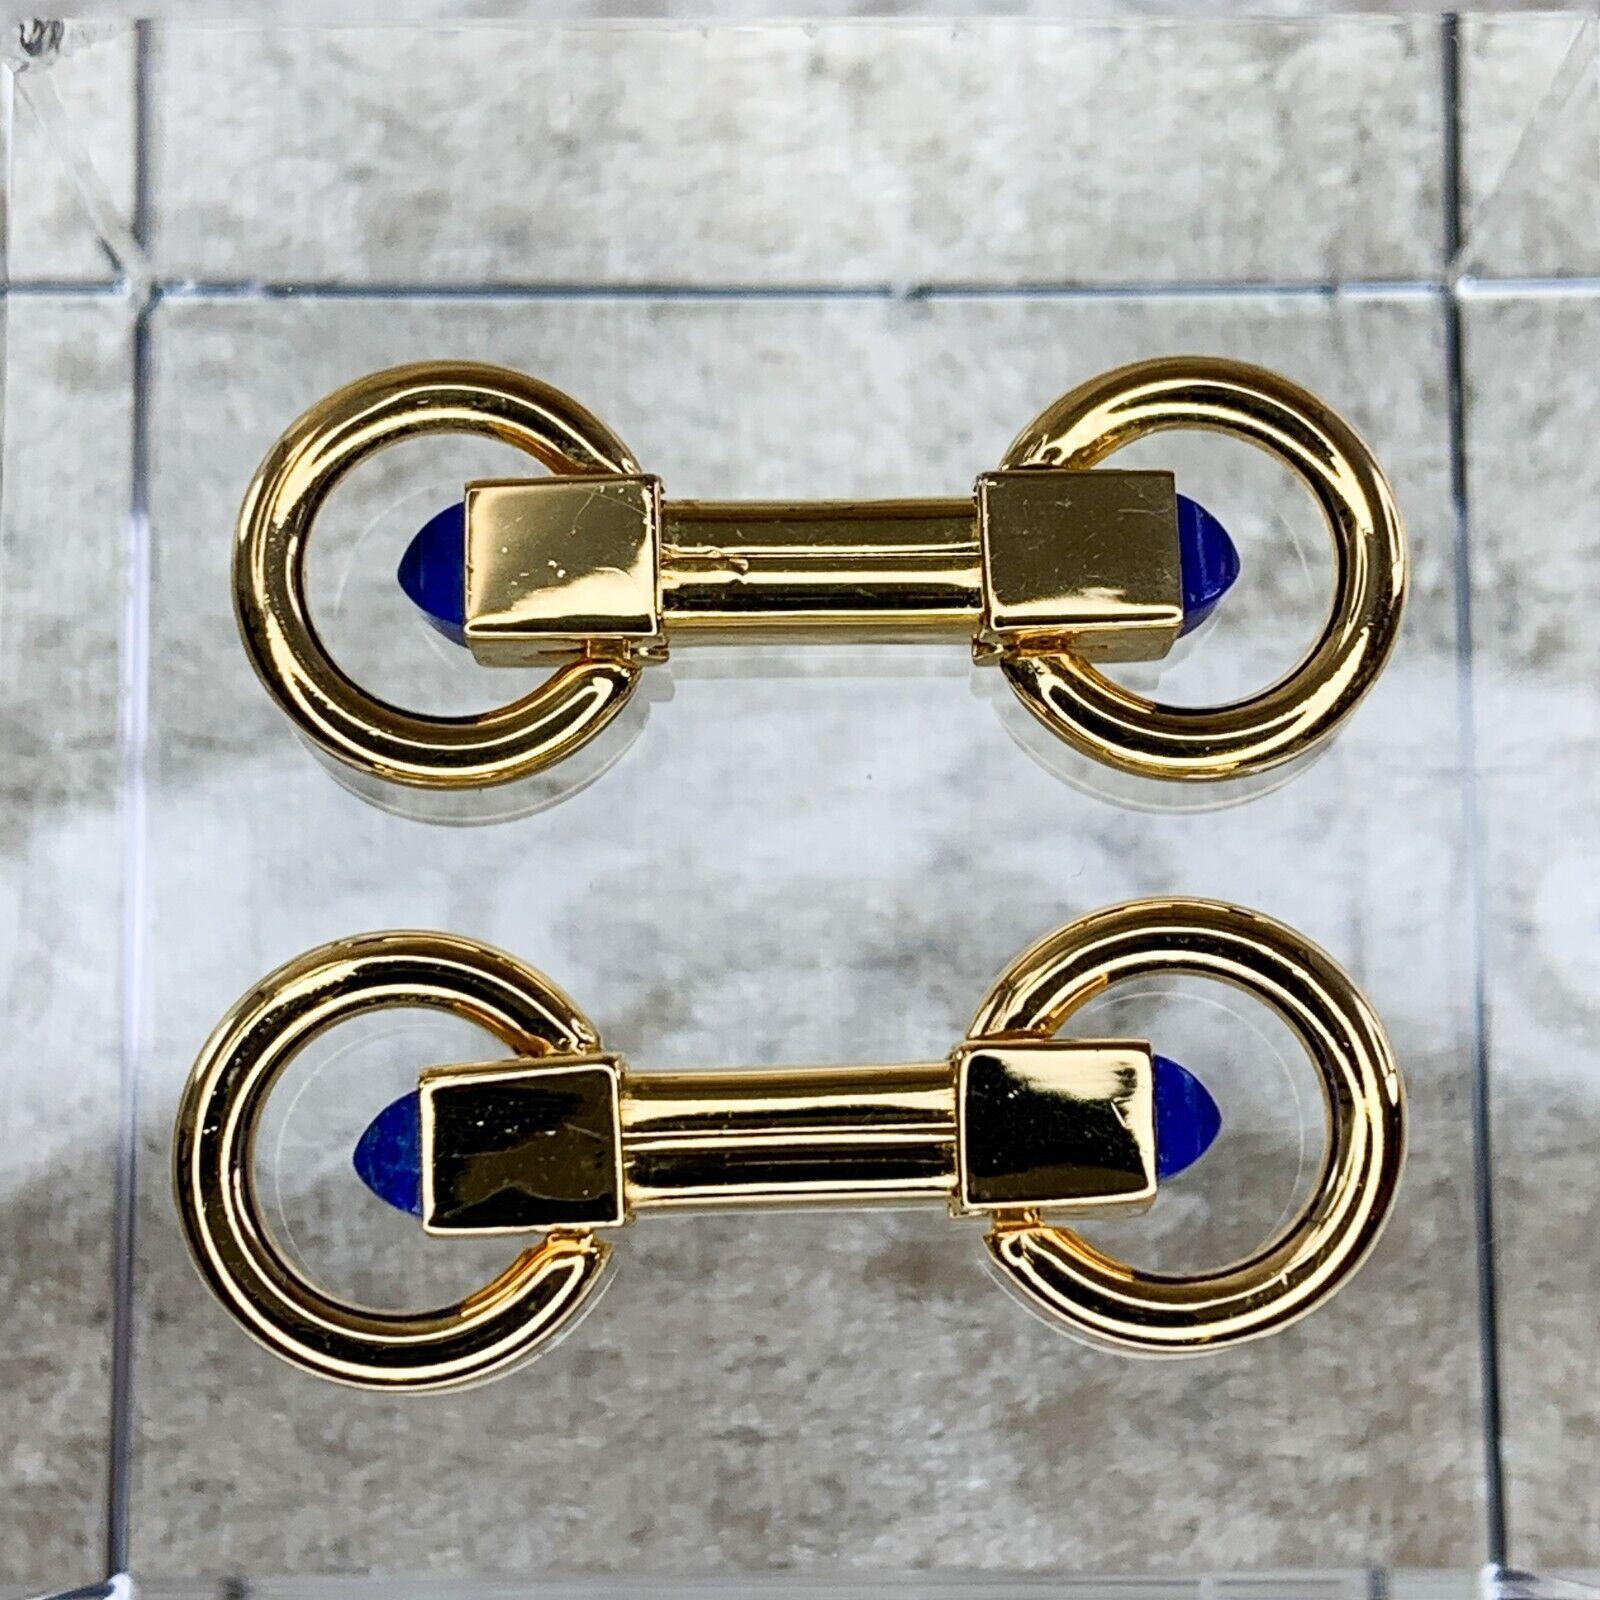 mirror quality alfred dunhill cufflinks